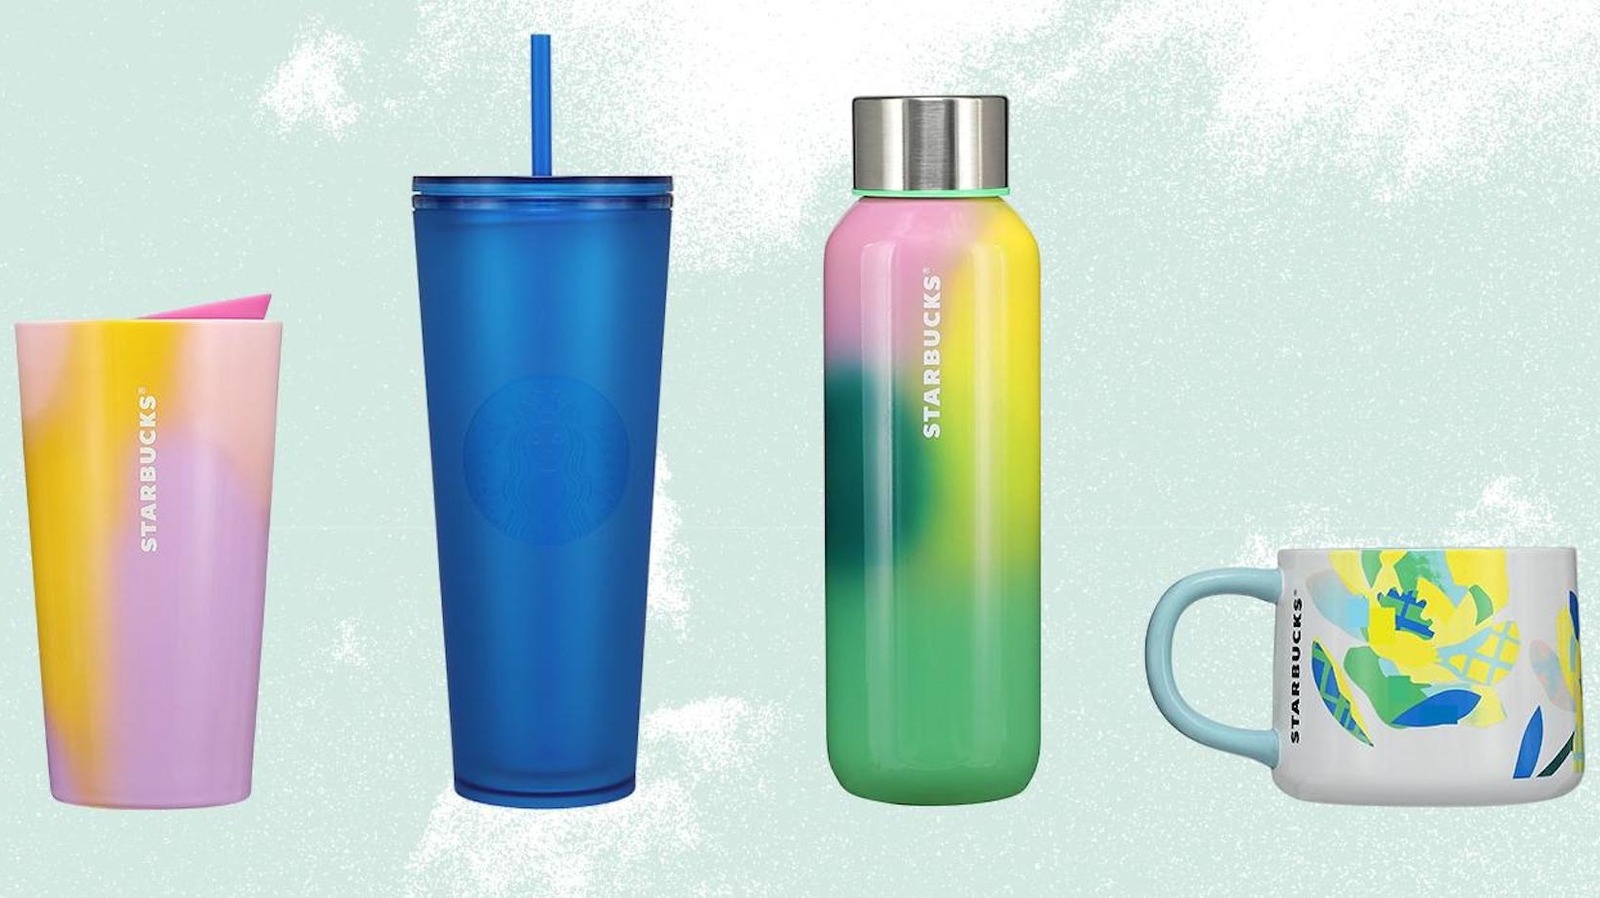 https://www.tastingtable.com/img/gallery/starbucks-new-spring-drinkware-lineup-is-bursting-with-color/l-intro-1678208562.jpg